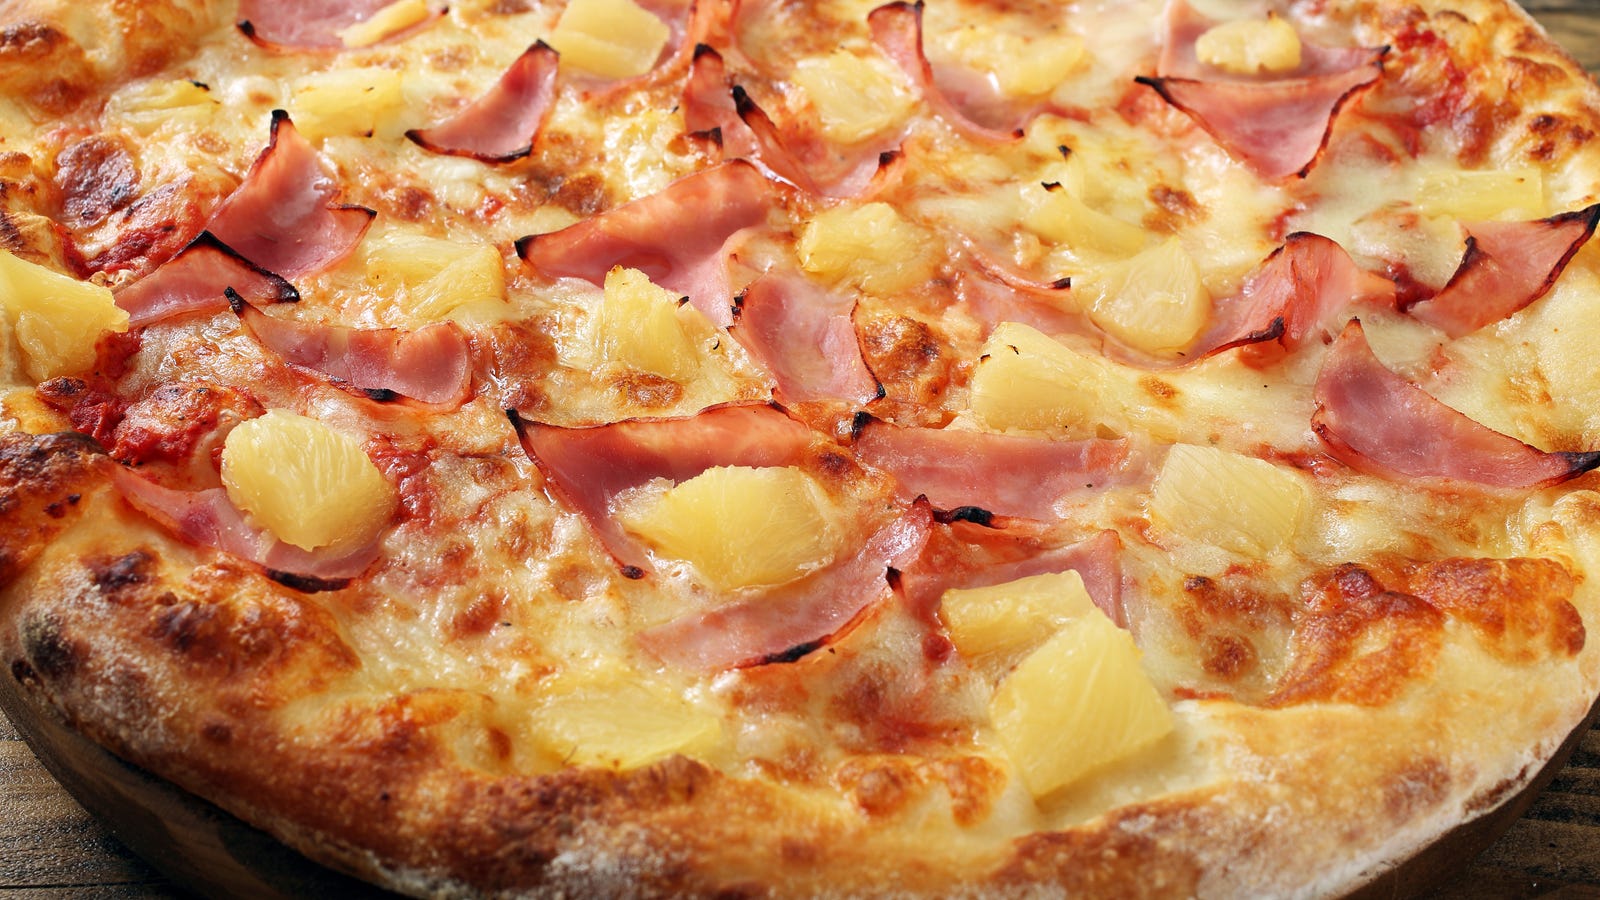 Pineapple on pizza is delicious and I will gladly die on ...